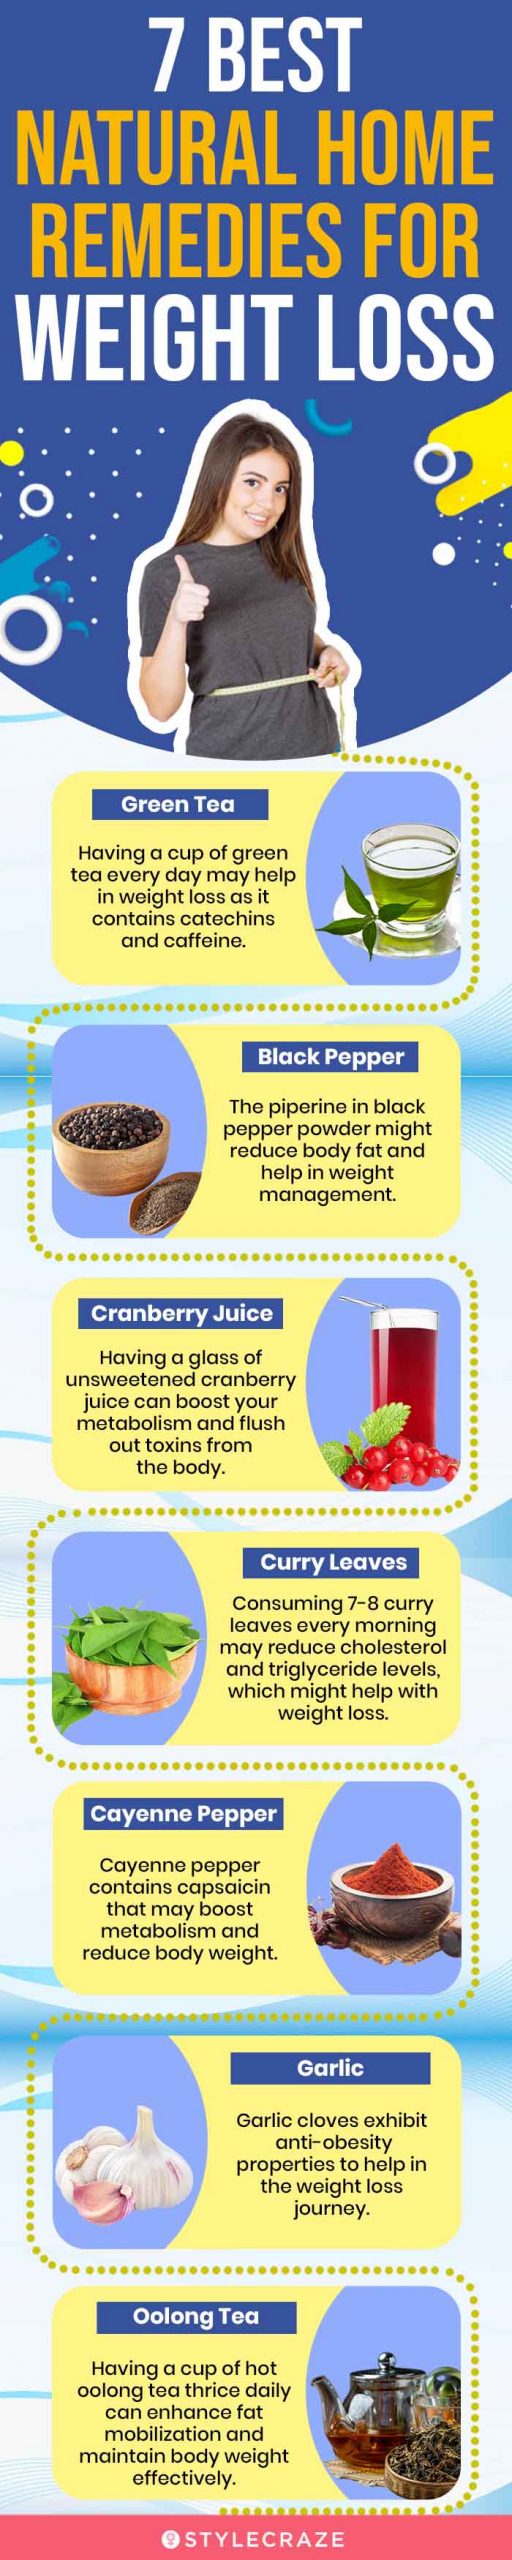 7 best natural home remedies for weight loss (infographic)